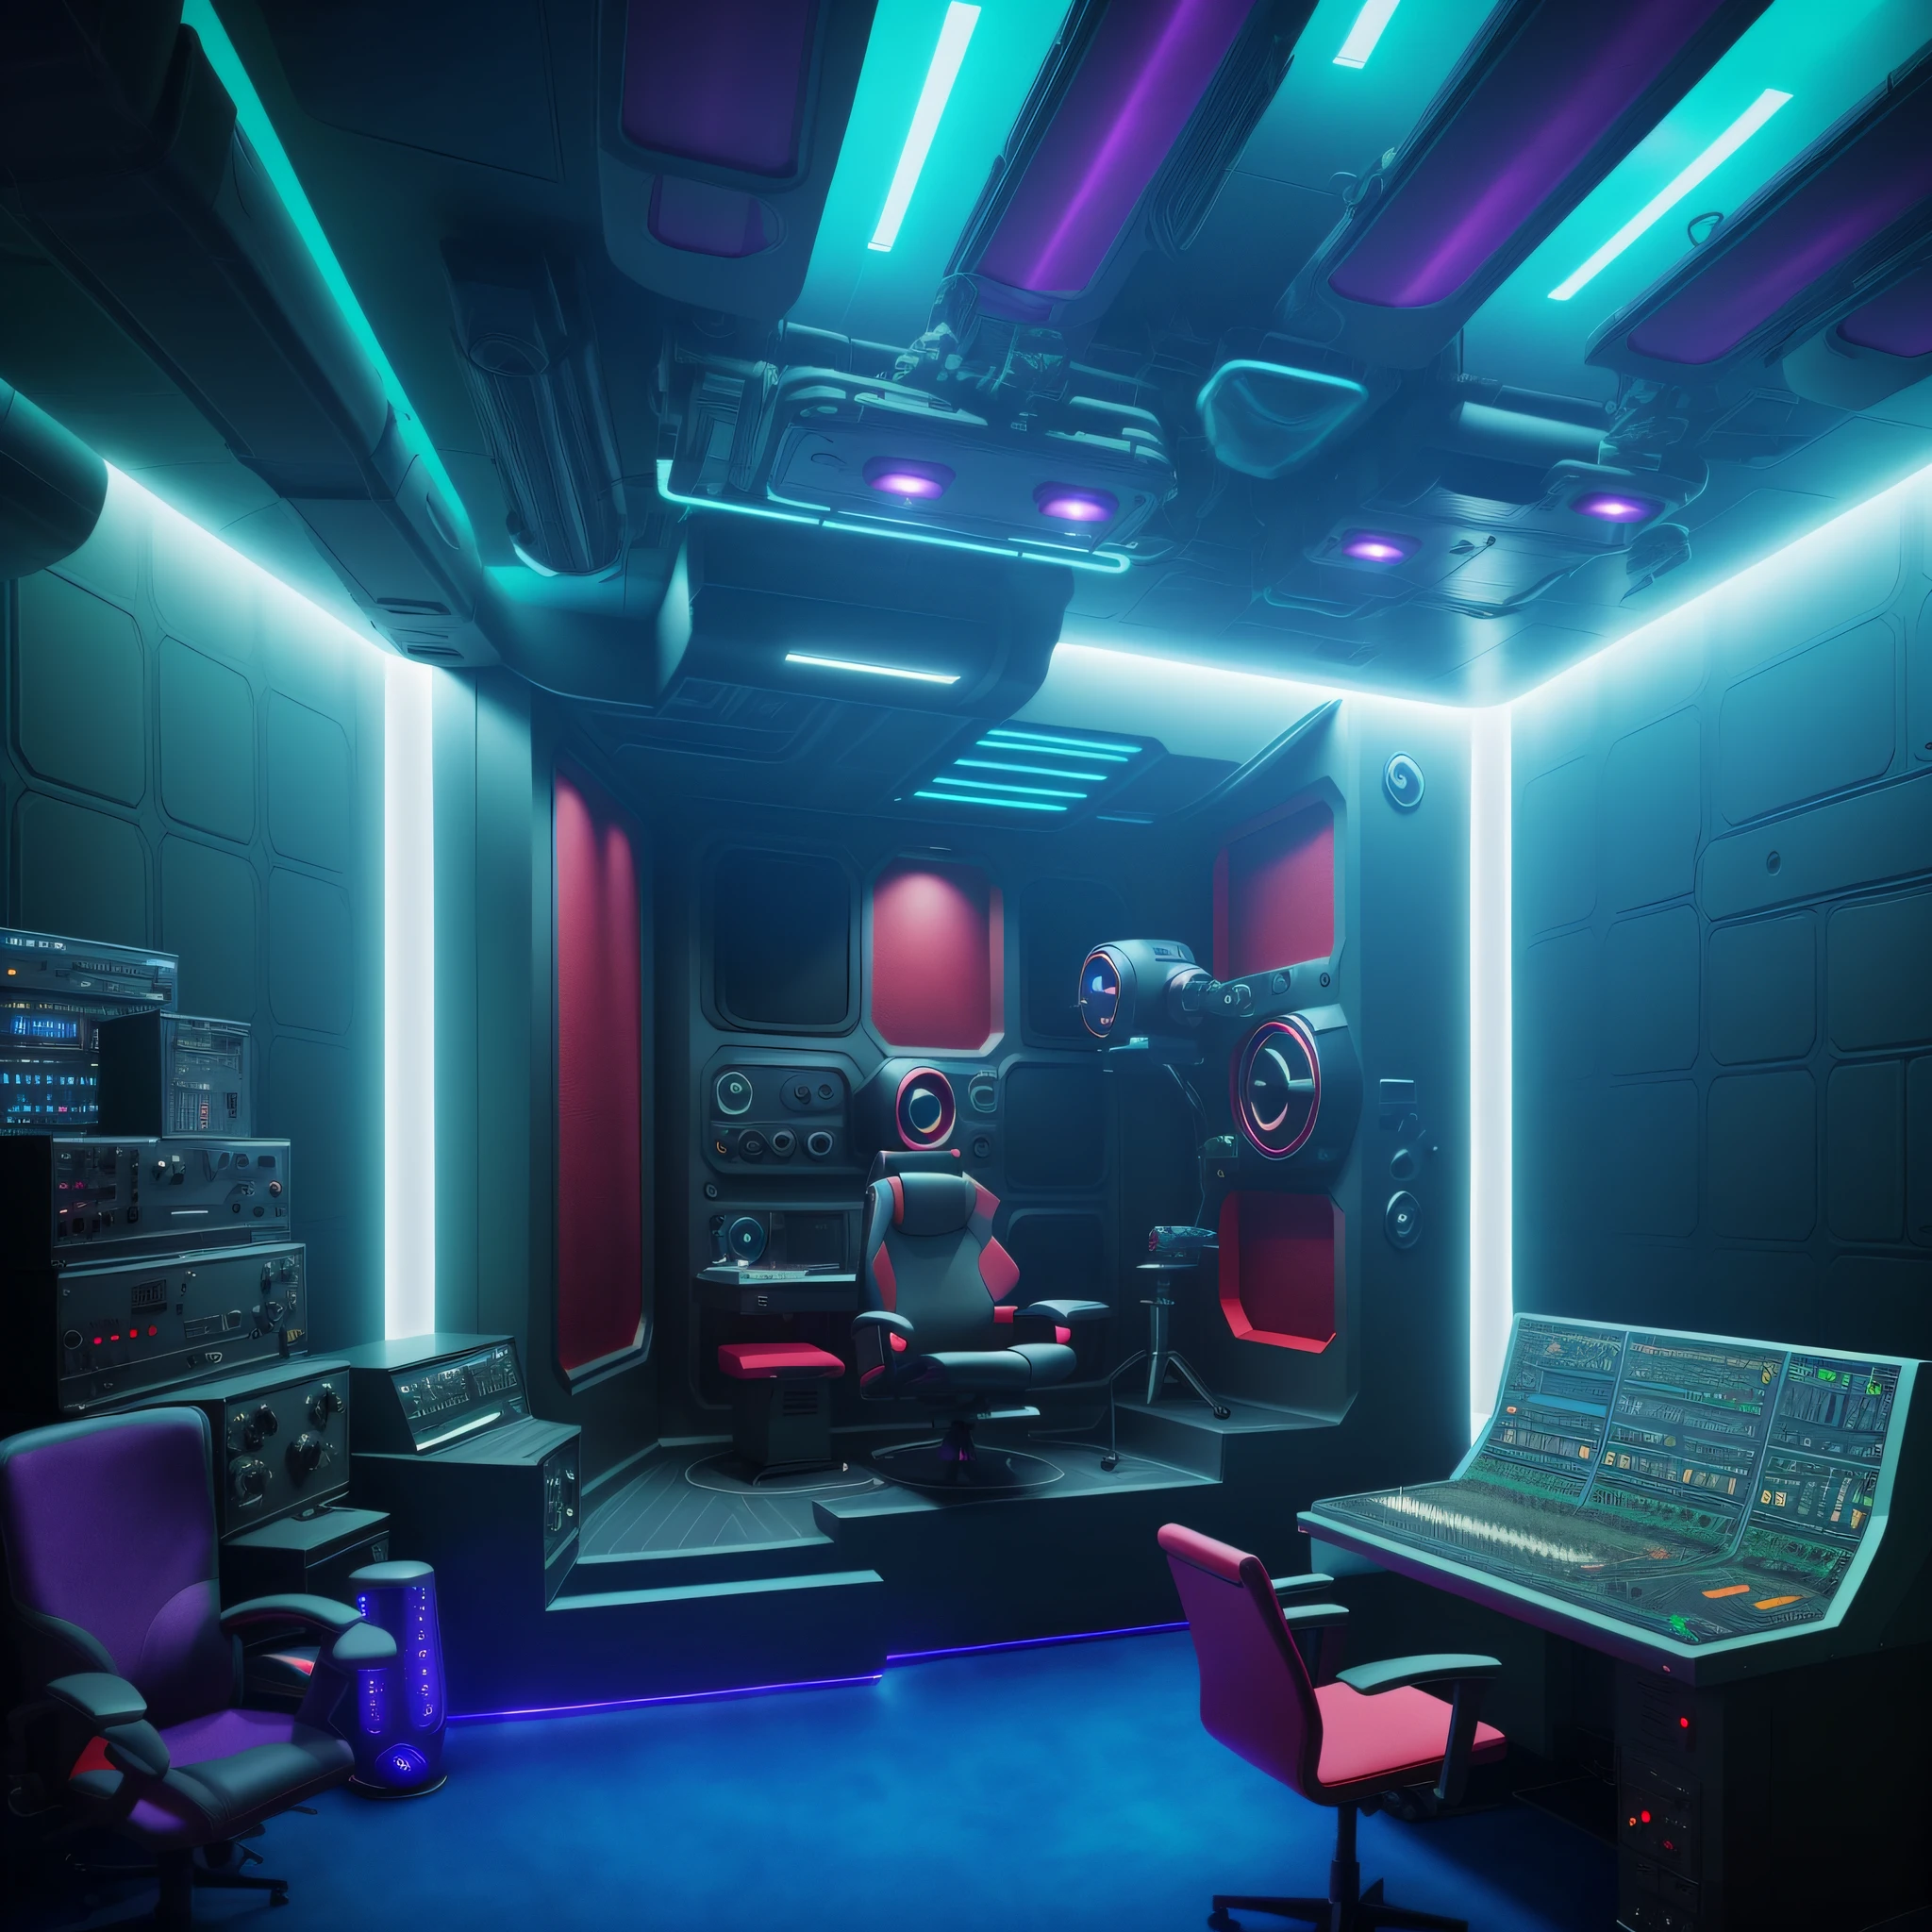 (back stage of a recording studio with a futuristic theme, which mimics the interior of a spaceship) inside ((scrbackrooms)),A futuristic recording studio that mimics the interior of a spaceship, with floating cameras, minimalist background with LED monitors, clear environment, predominant white color, with neo punk style details